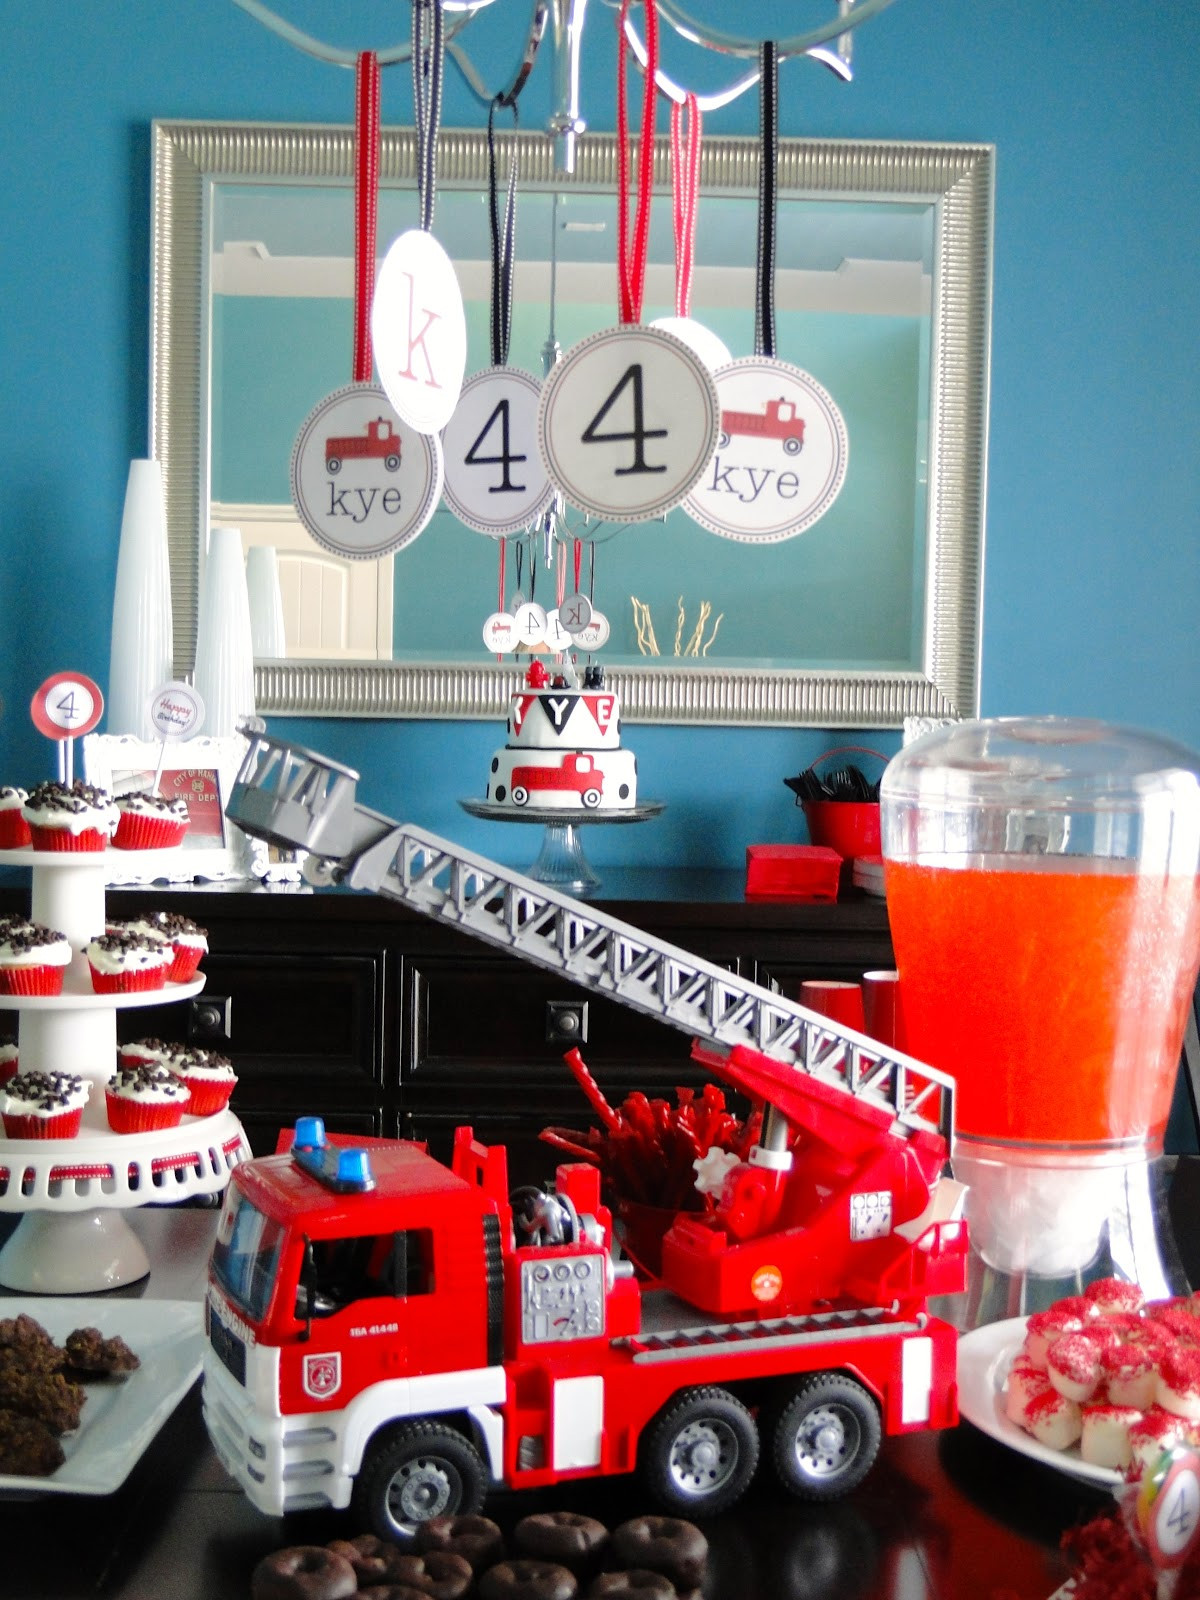 Firetruck Birthday Party Supplies
 The Journey of Parenthood Firetruck Party Decorations